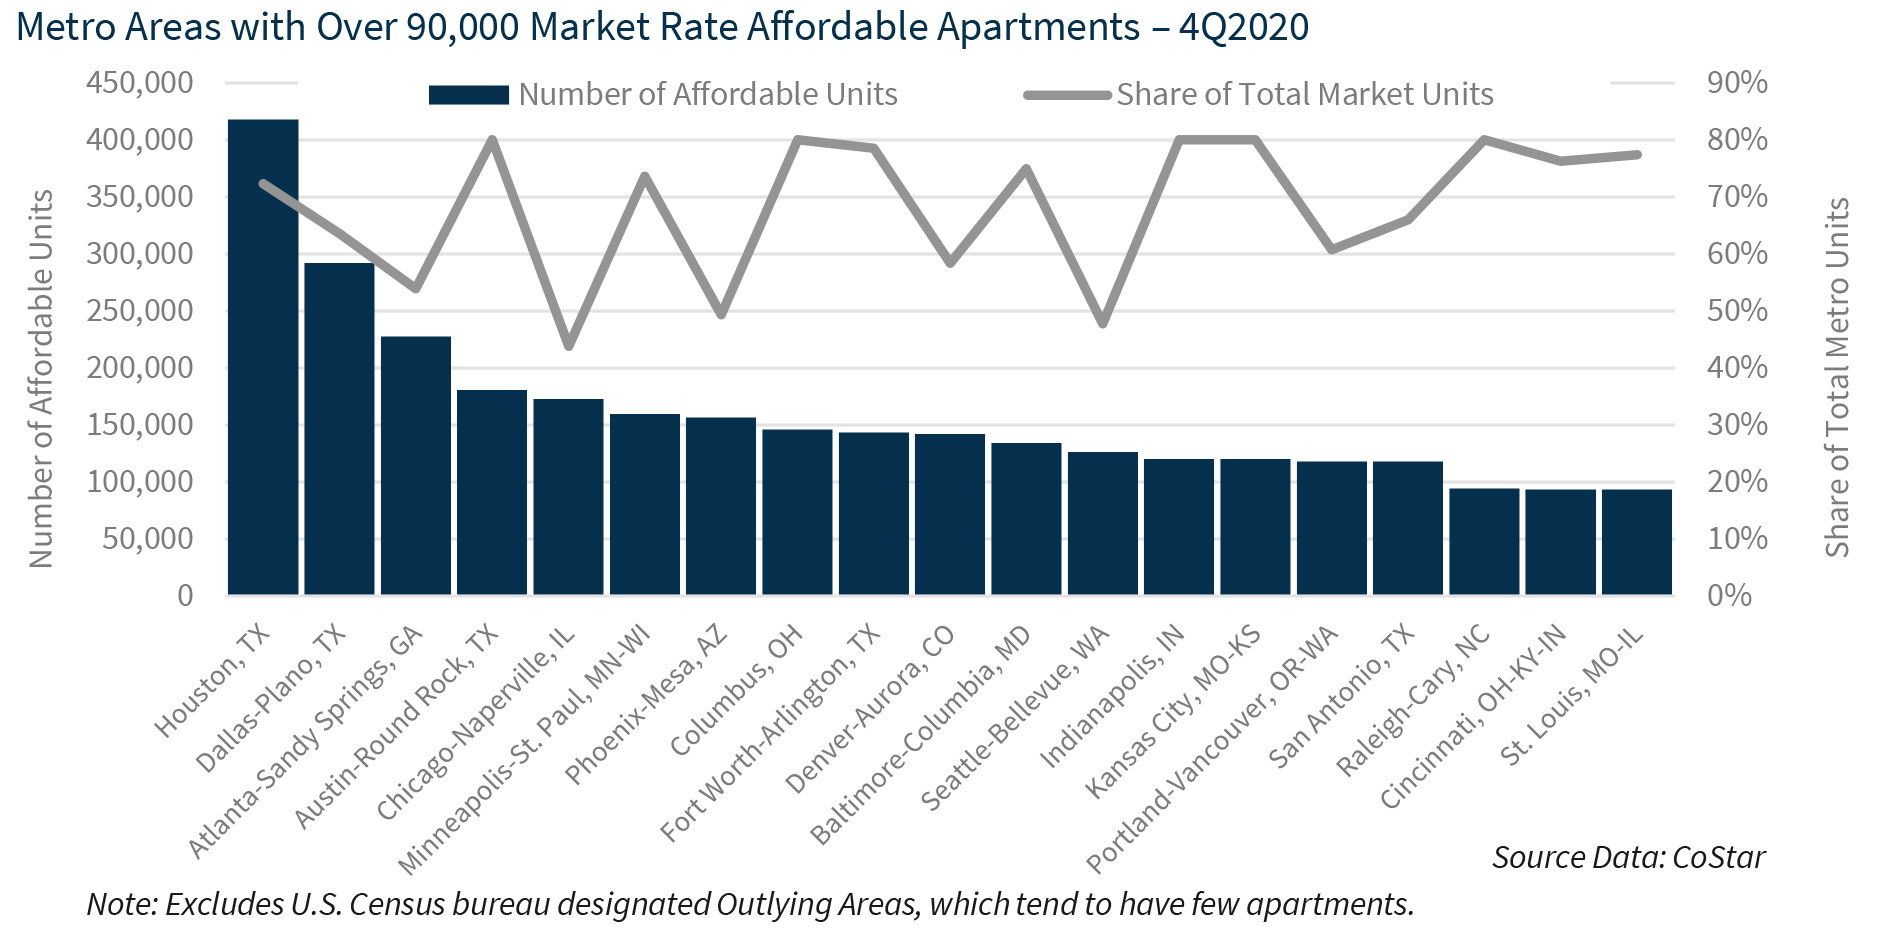 Metro Areas with Over 90,000 Market Rate Affordable Apartments – 4Q2020